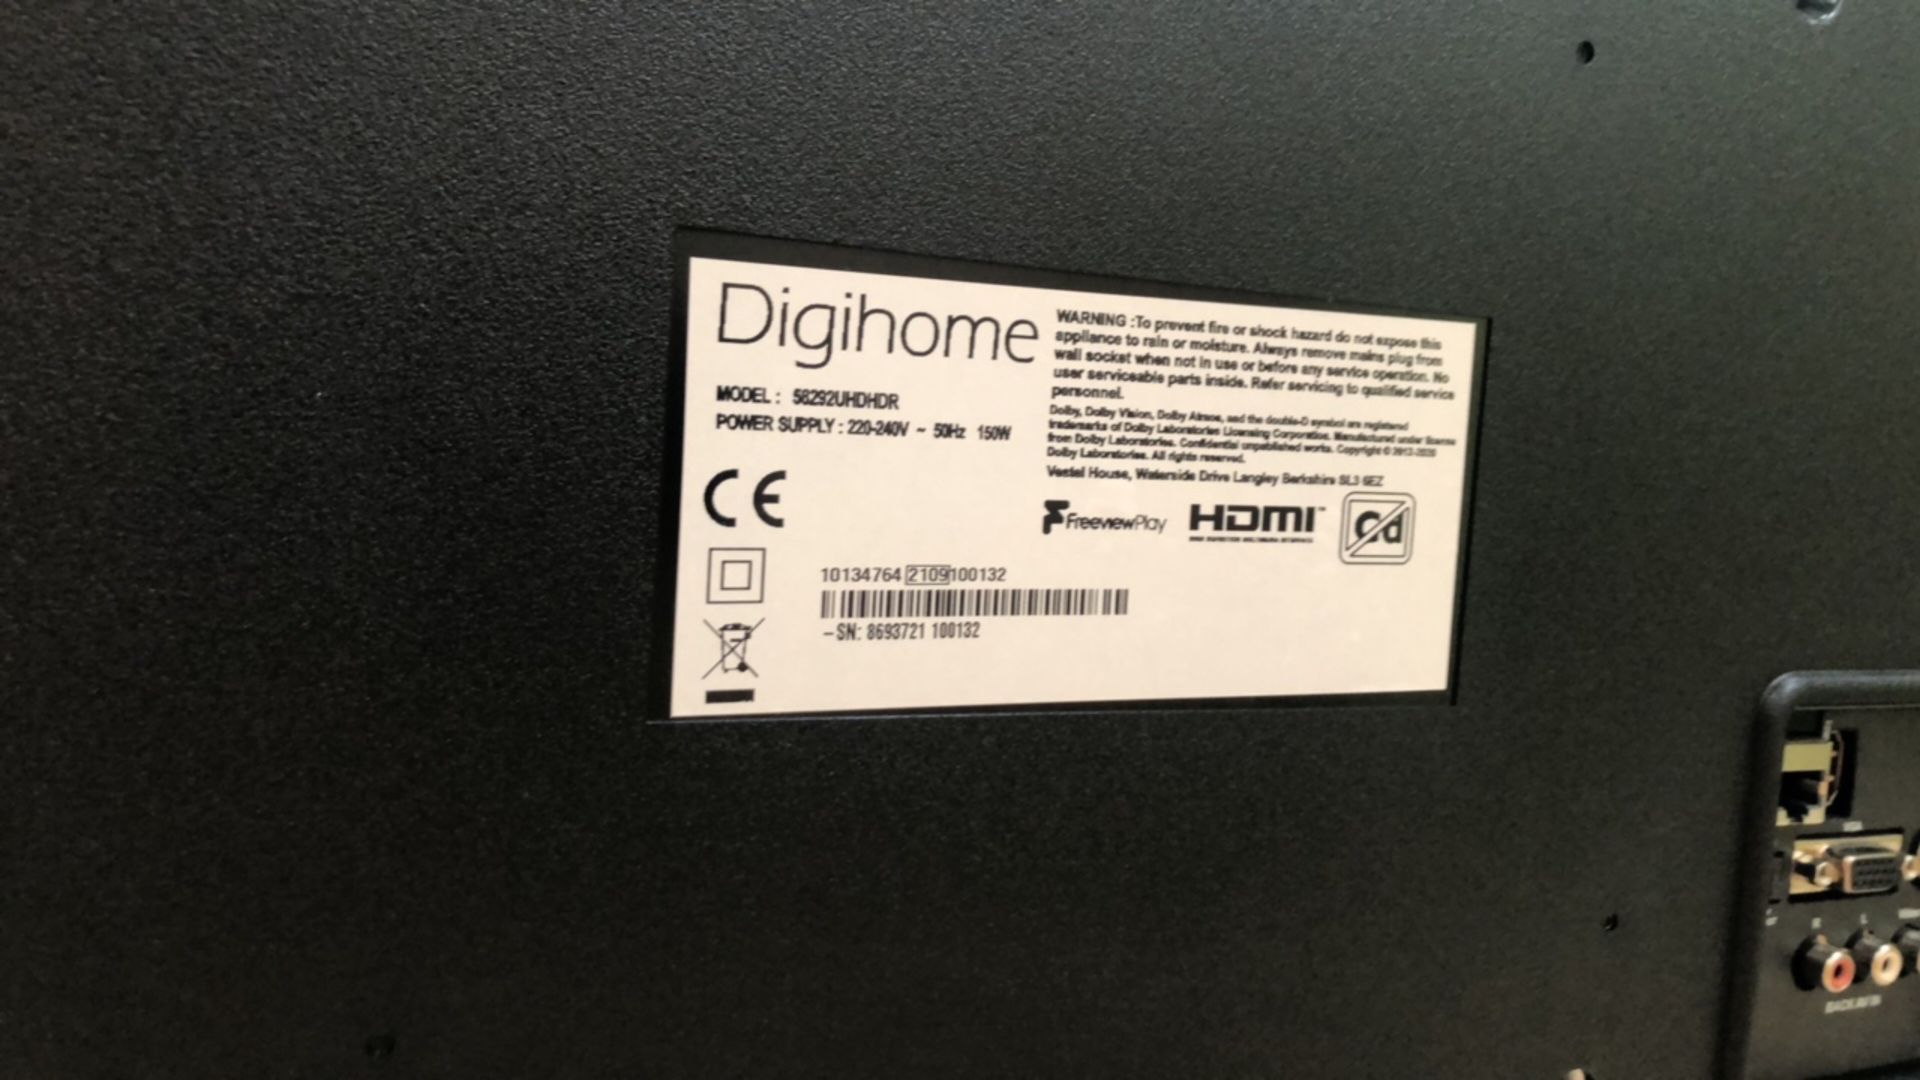 DIGIHOME 58 INCH 58292UHDHDR UHD TV - Image 2 of 2